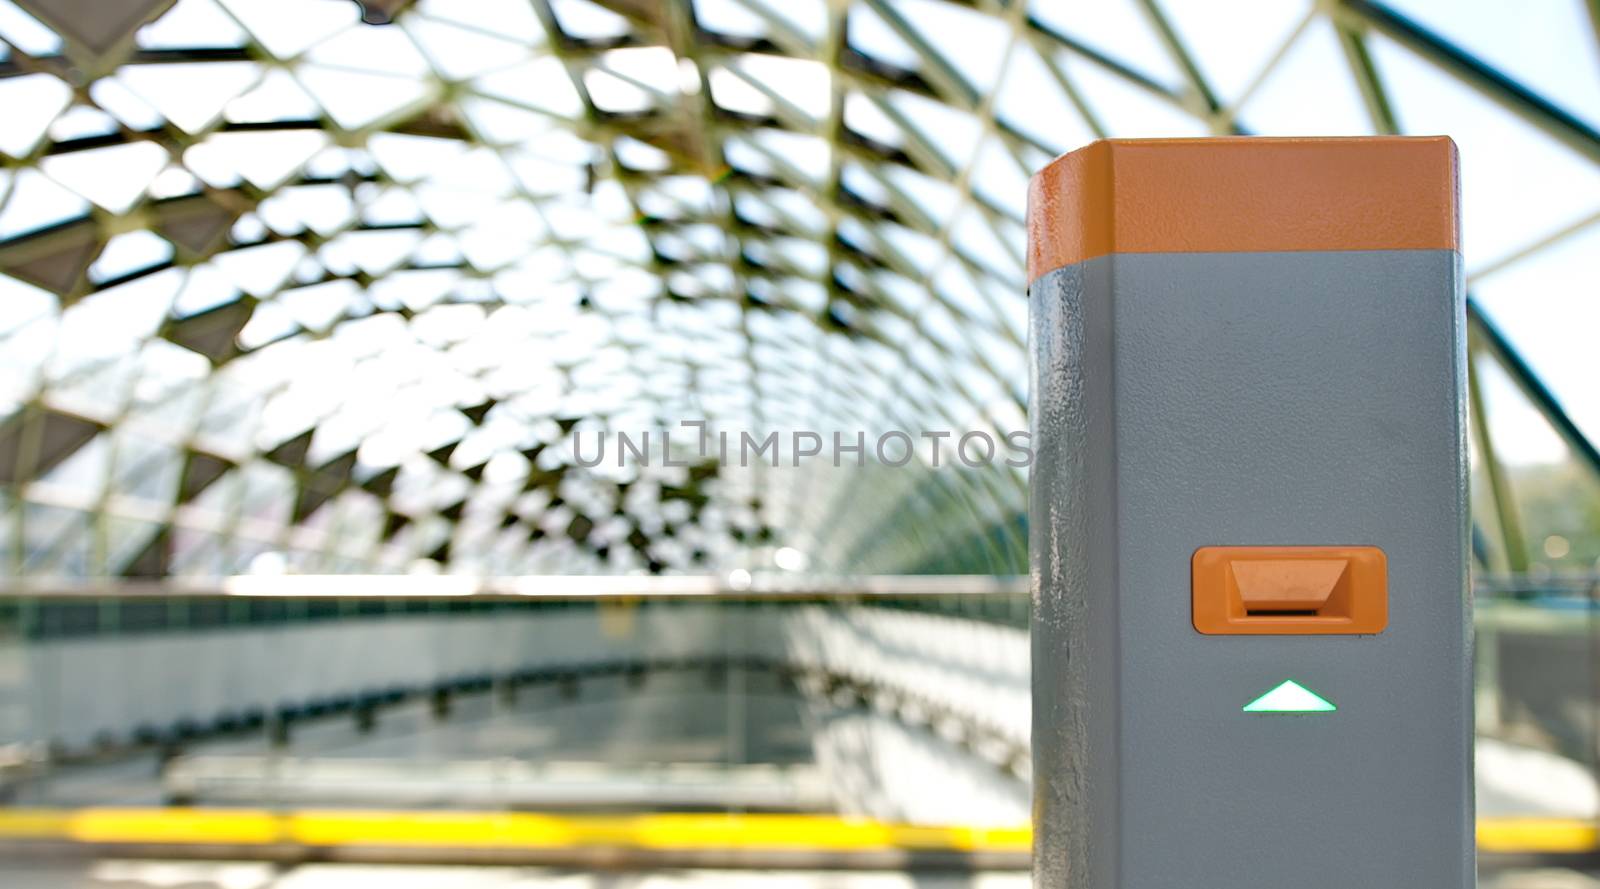 Ticket validator at an underground station by anderm